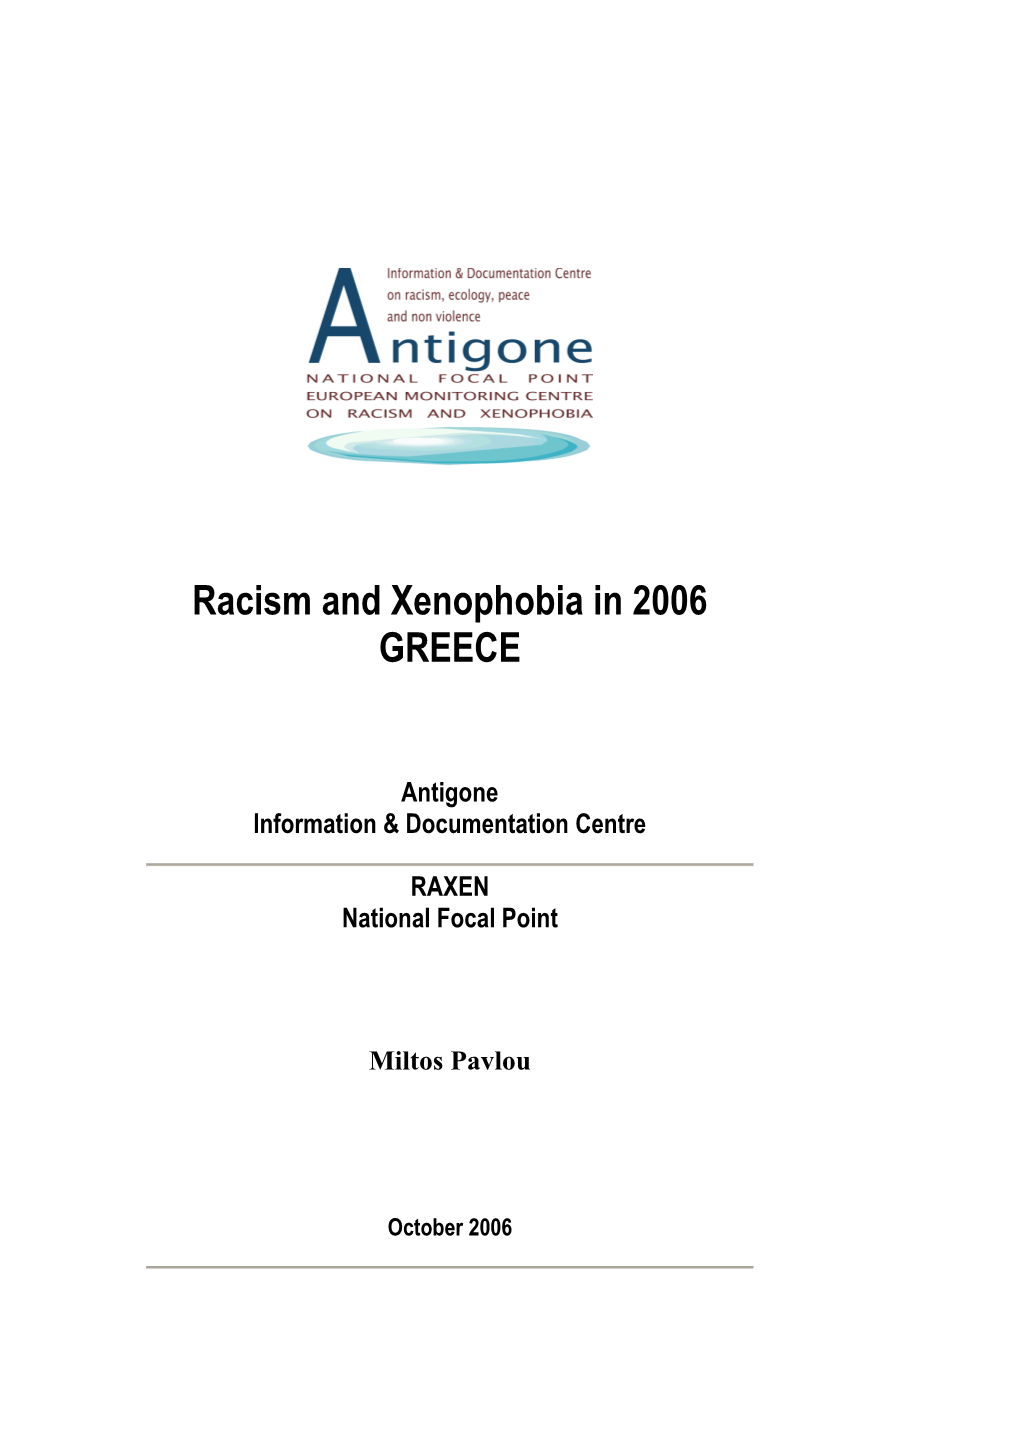 Racism and Xenophobia in 2006 GREECE